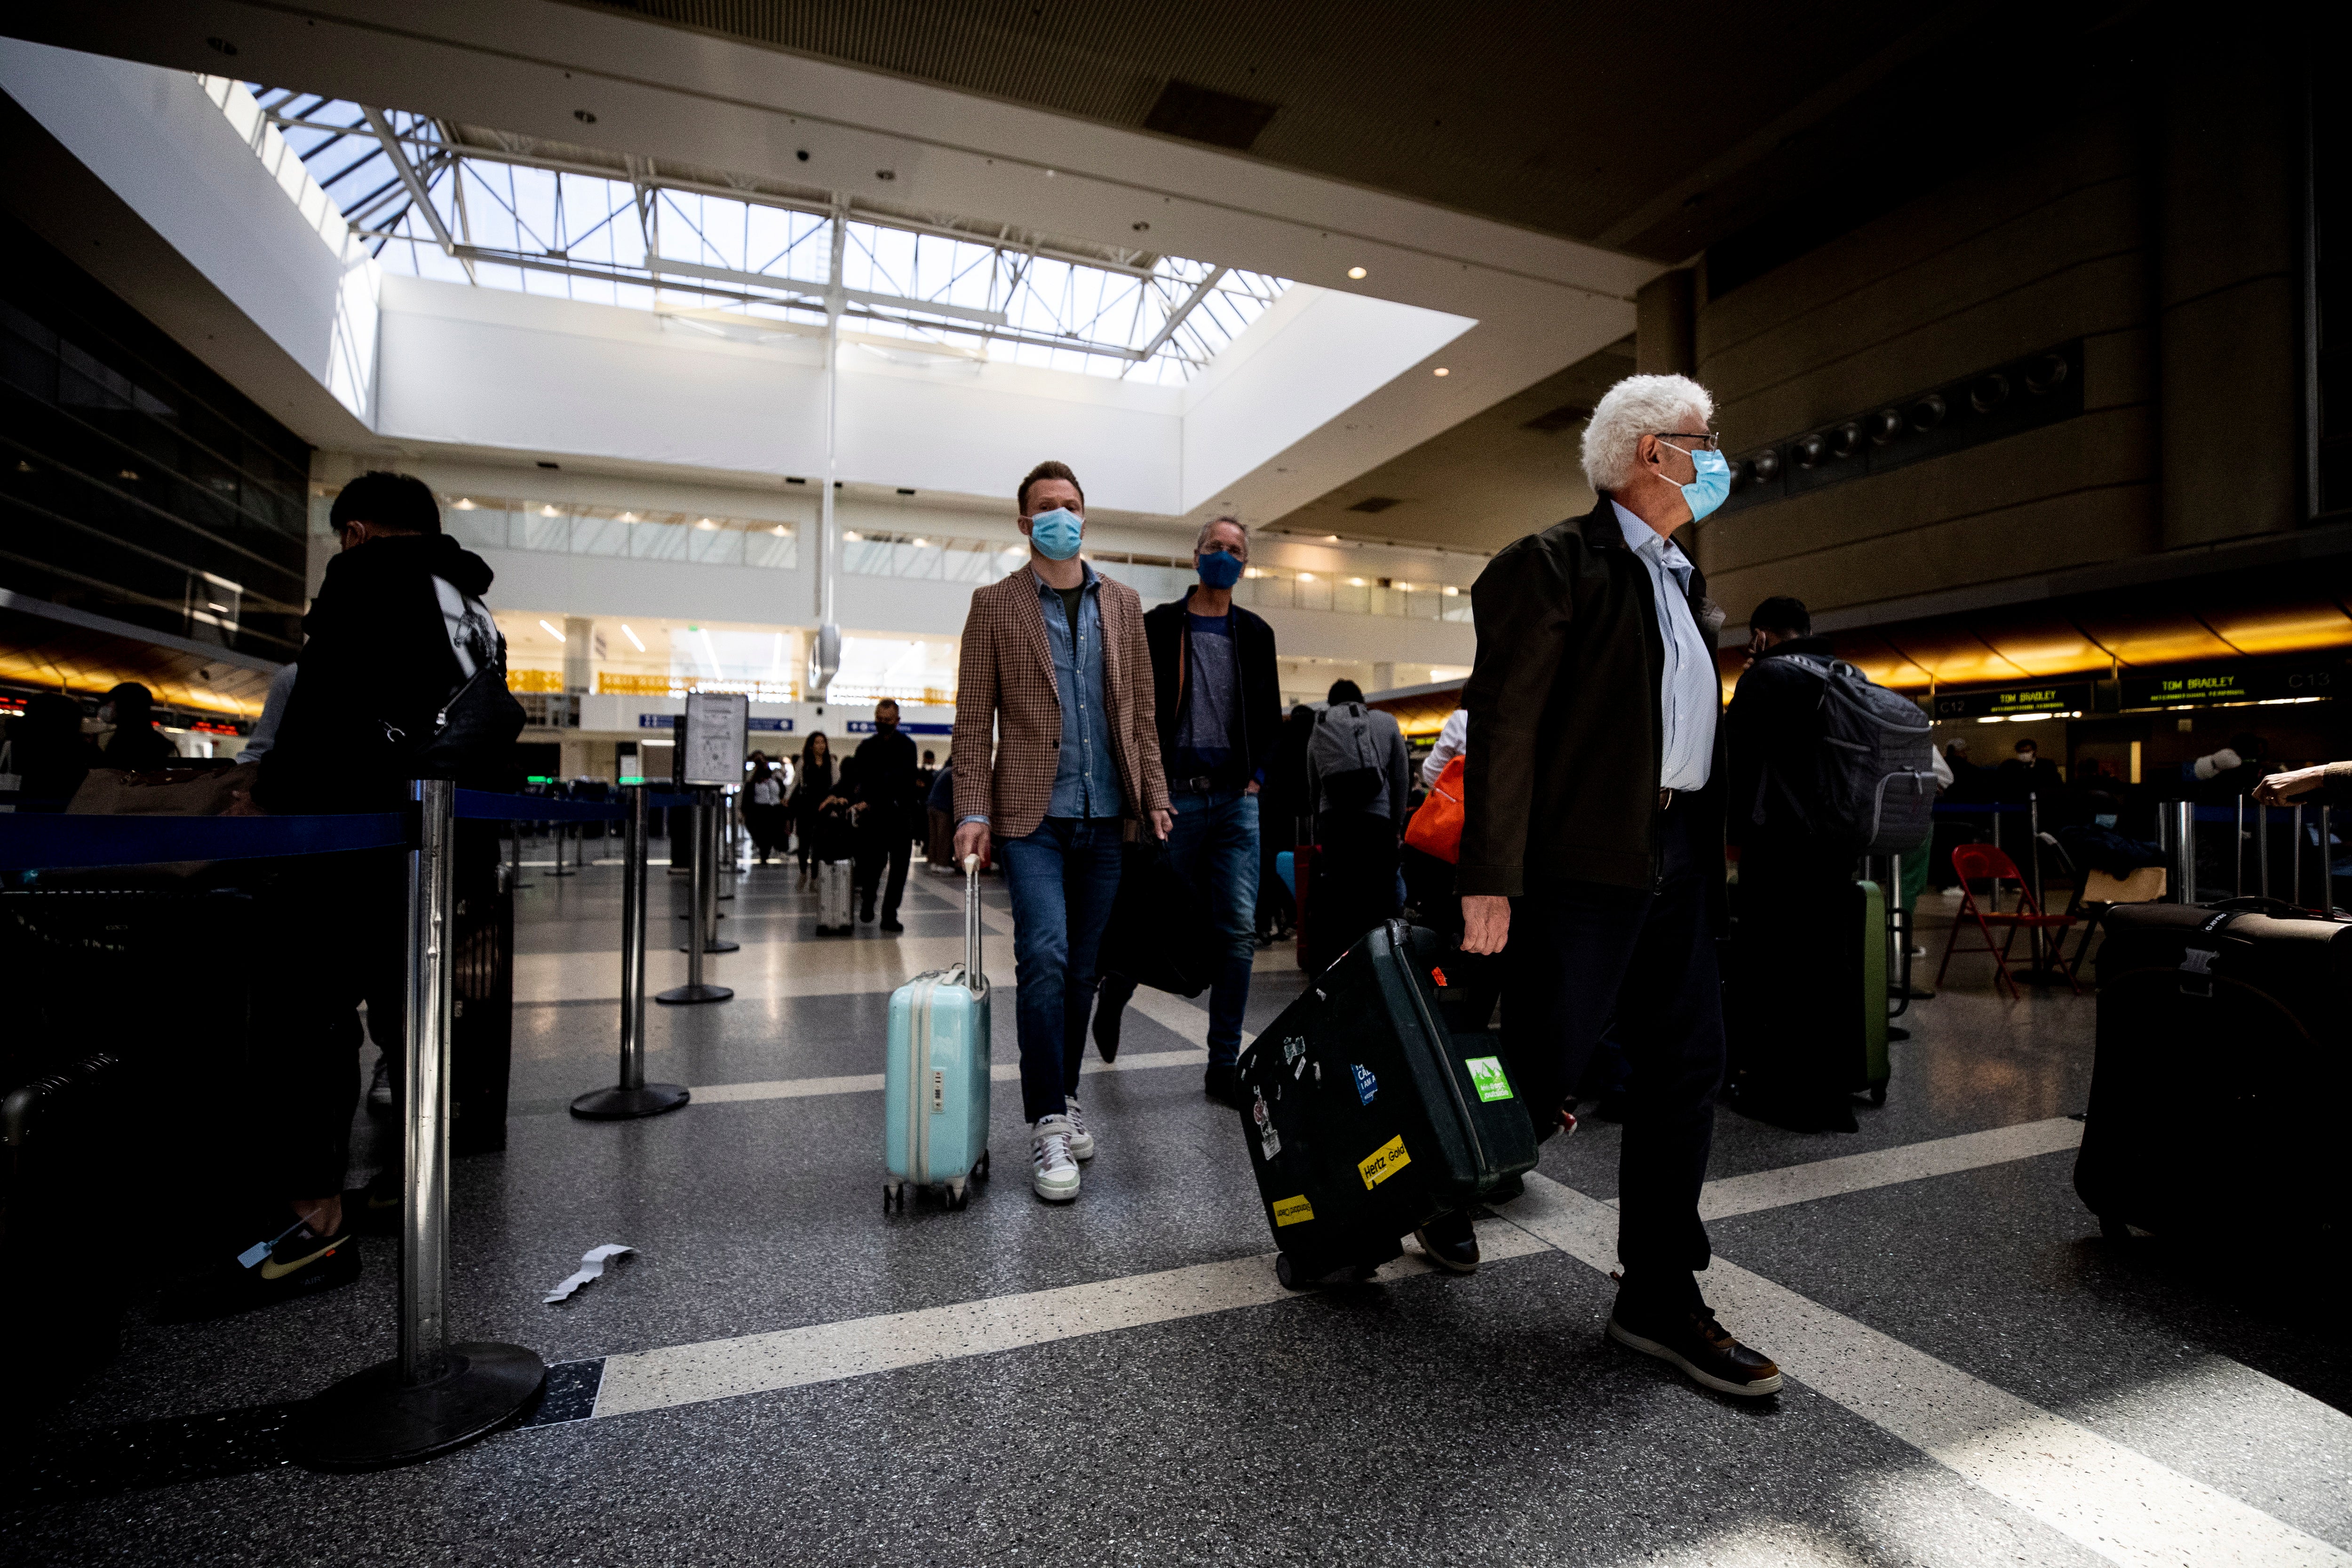 Passengers wear masks at the International flights terminal of the Los Angeles Airport, in Los Angeles, California, USA, 13 April 2022.